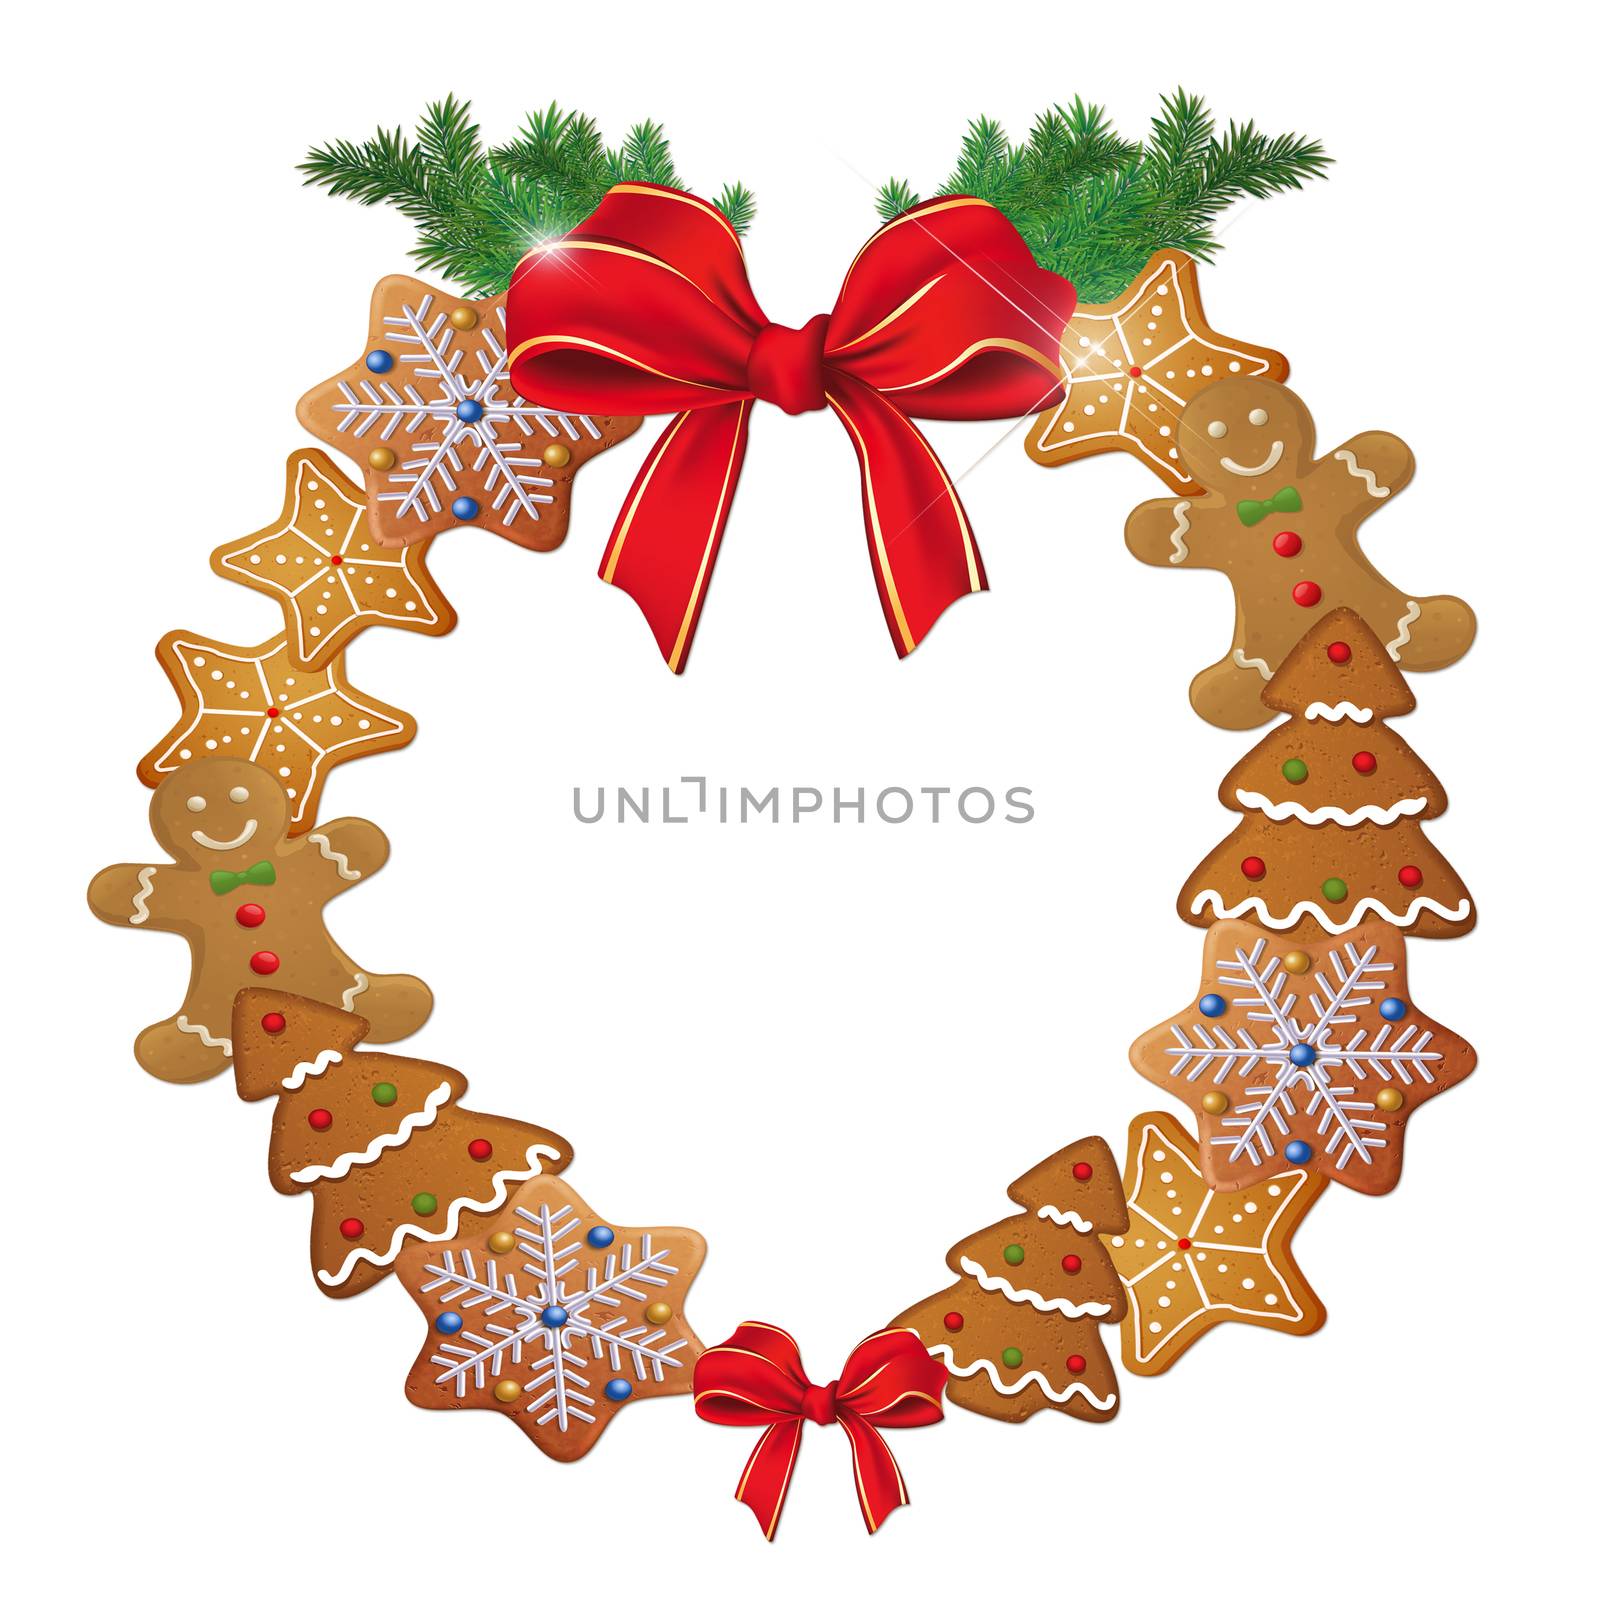 Illustration of Christmas wreath with cookies